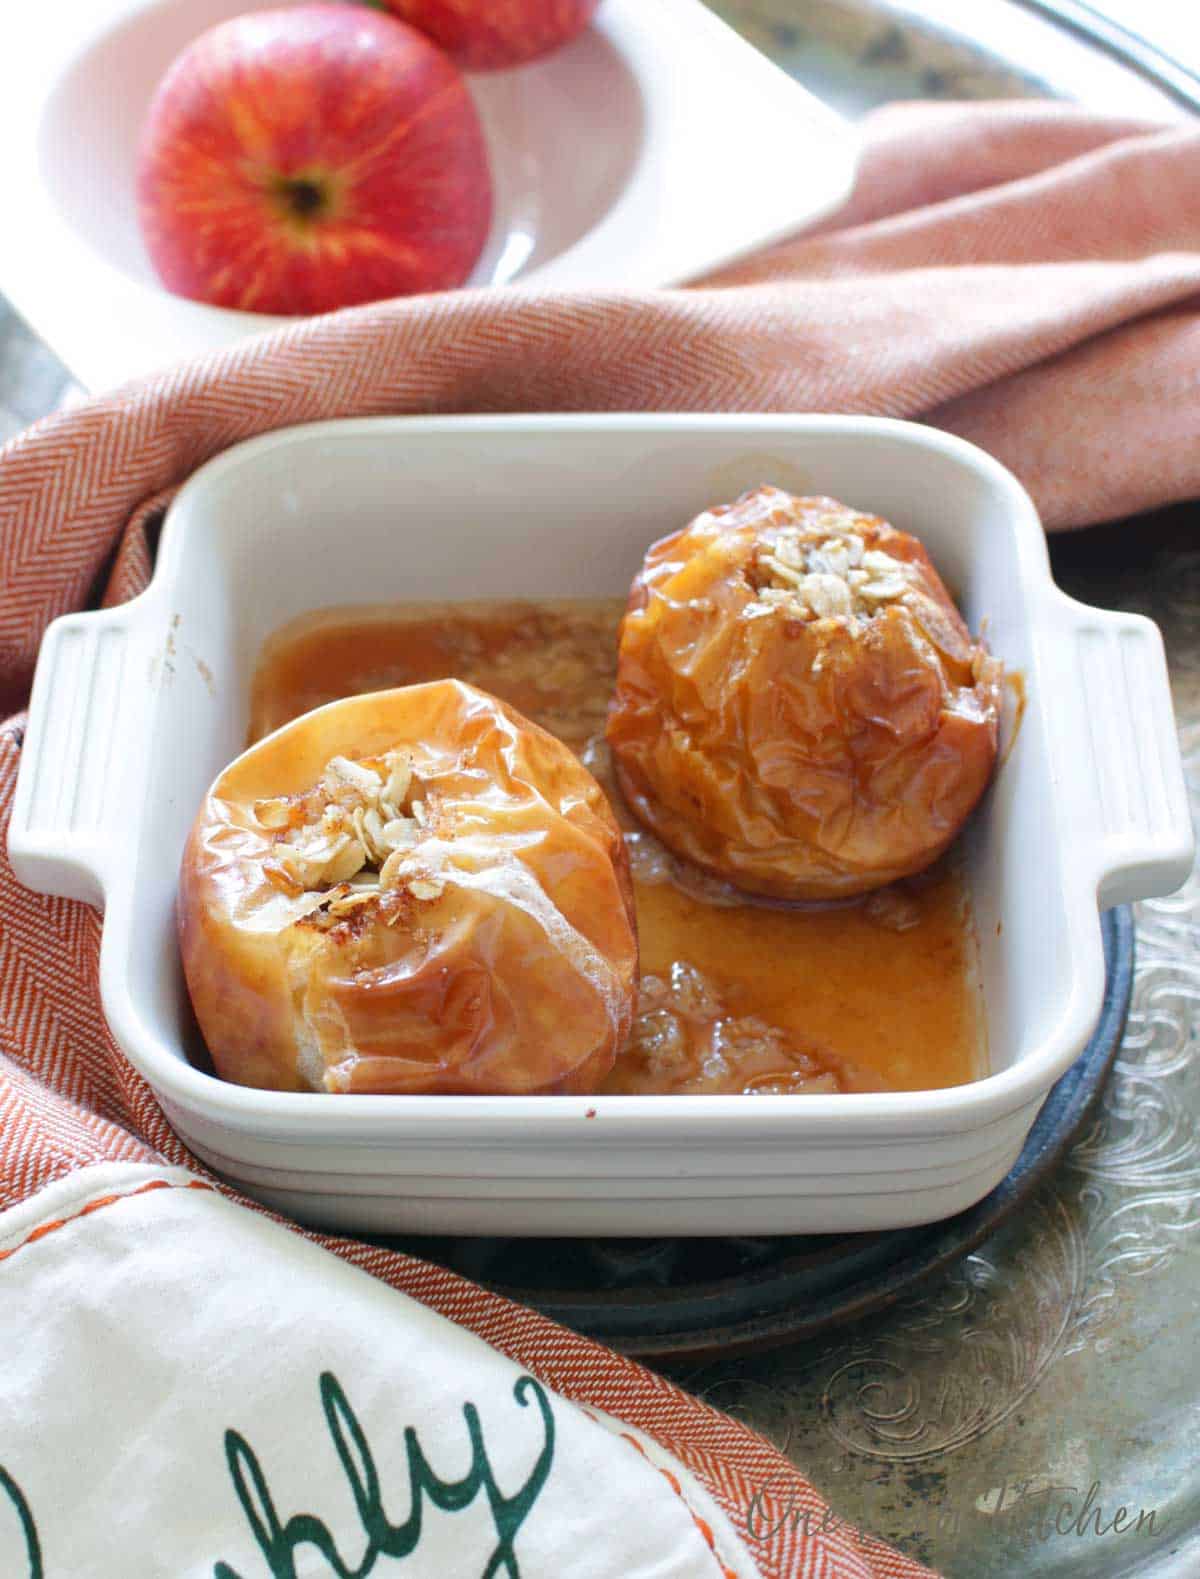 Two baked apples in a small baking dish filled with oats and brown sugar next to a bowl of apples